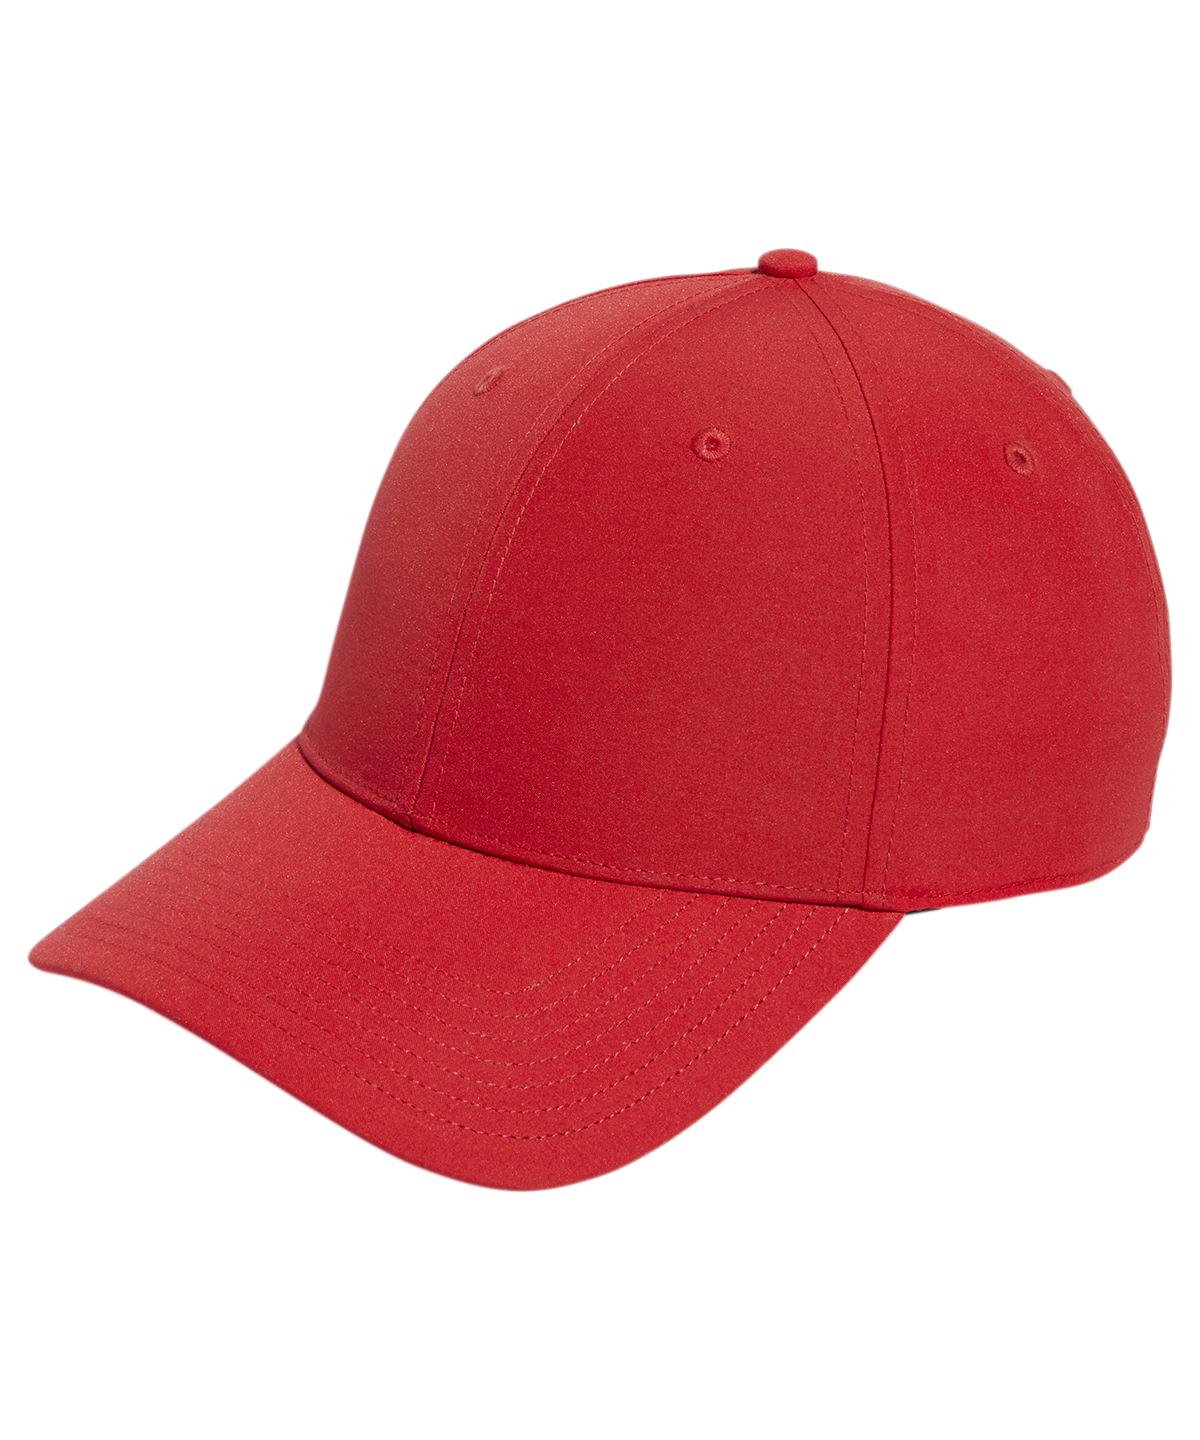 Adidas Golf Performance Crestable Cap Red Size One Size